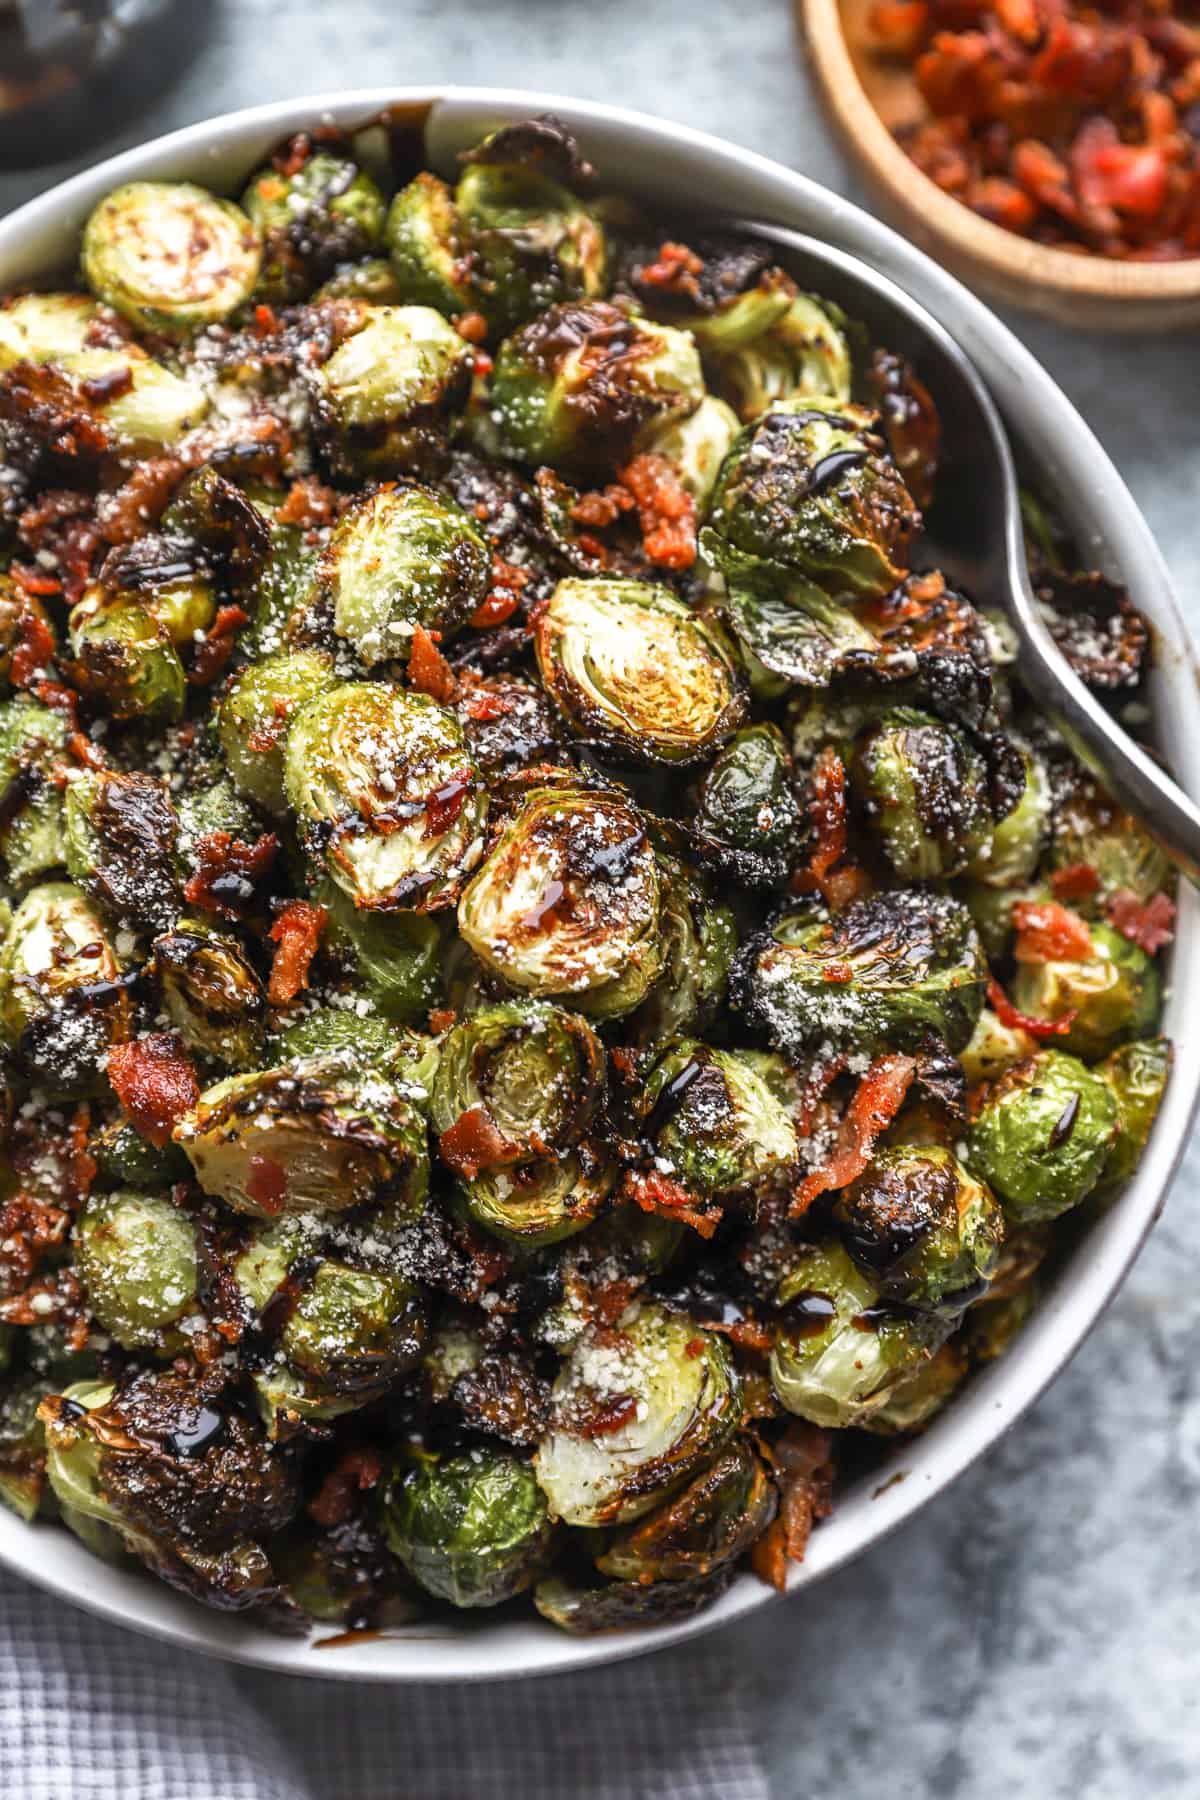 partial overhead view of roasted brussels sprouts topped with bacon, cheese, and balsamic in a serving bowl with a serving spoon.